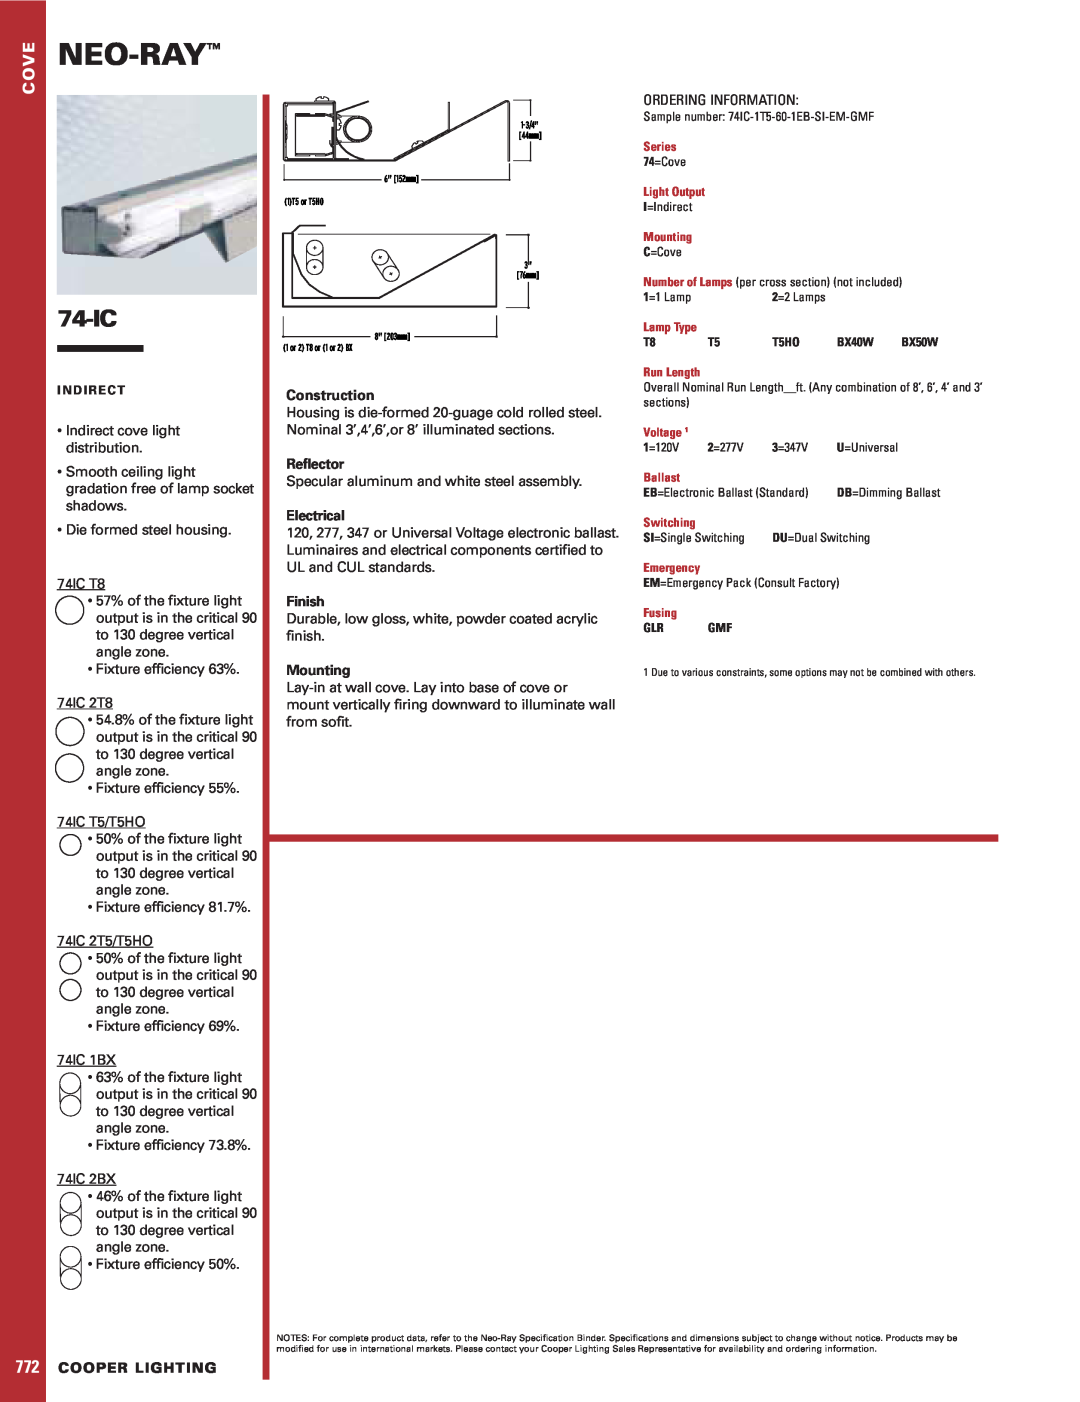 Cooper Lighting 74-IC specifications Neo-Ray, Cove, Construction, Reflector, Electrical, Finish, Mounting, Cooper Lighting 